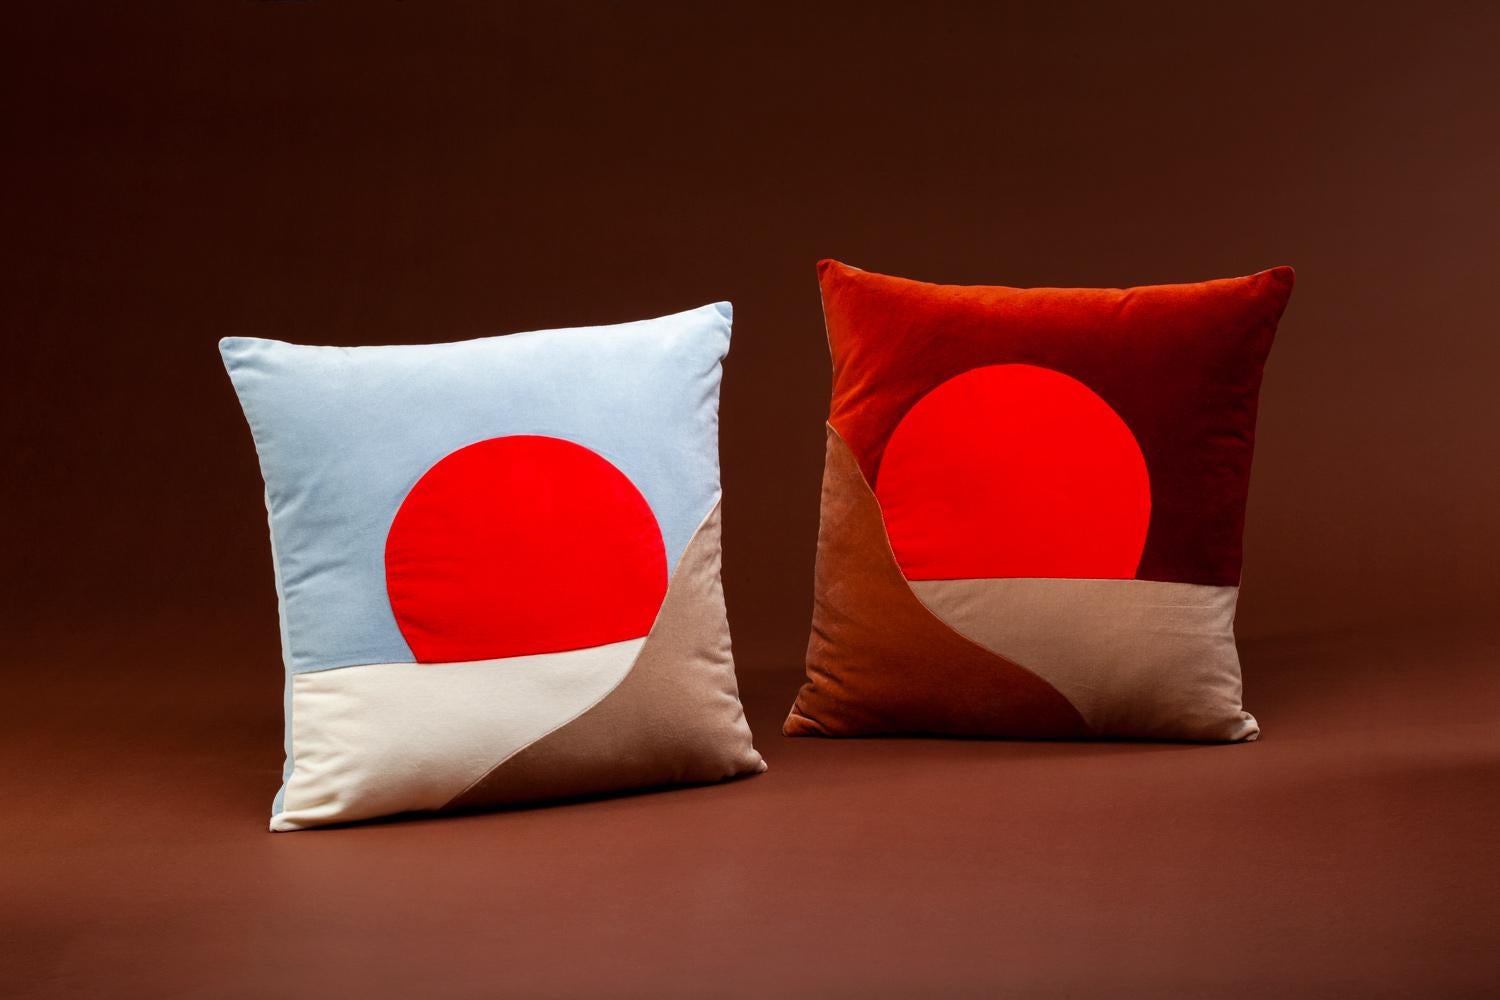 There is an undeniable magic in every sunrise and sunset.

A talisman for the home of beauty, good energies and comfort. 
This decorative pillow is ethically produced by small family run business, hand-made by skilled portuguese artisans with top